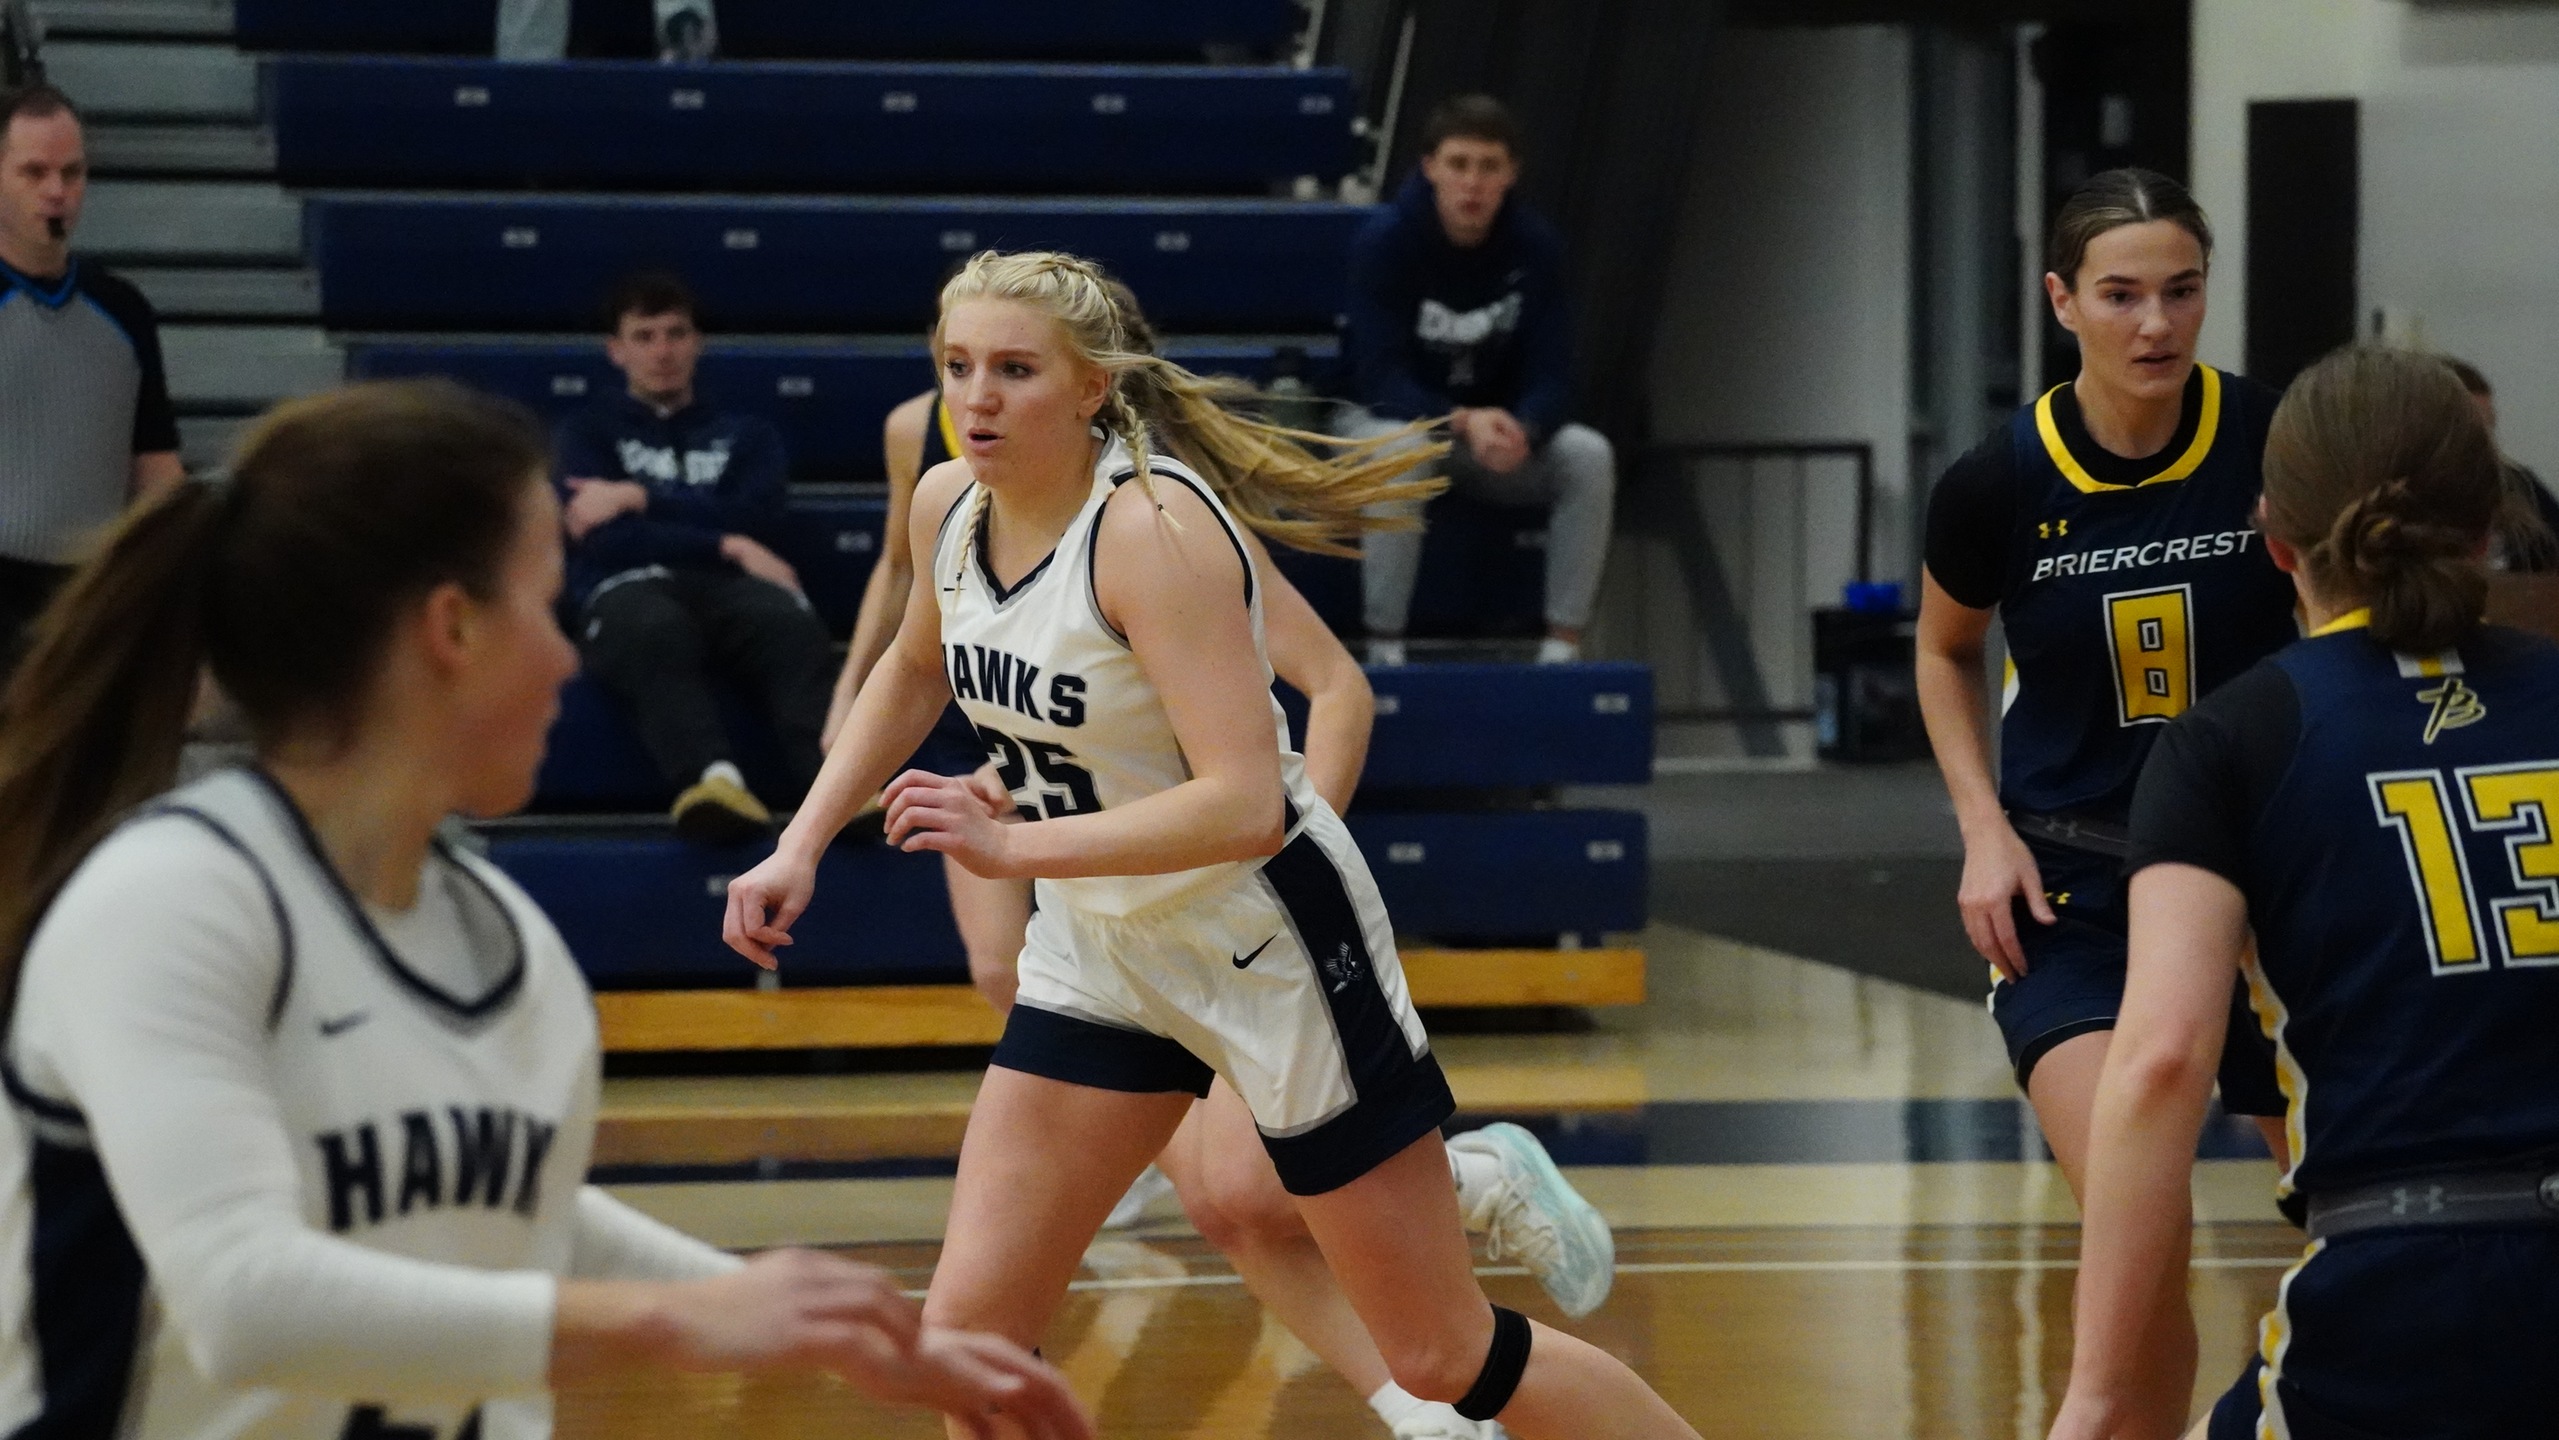 Dominant defensive second half leads Blue Hawk women to victory